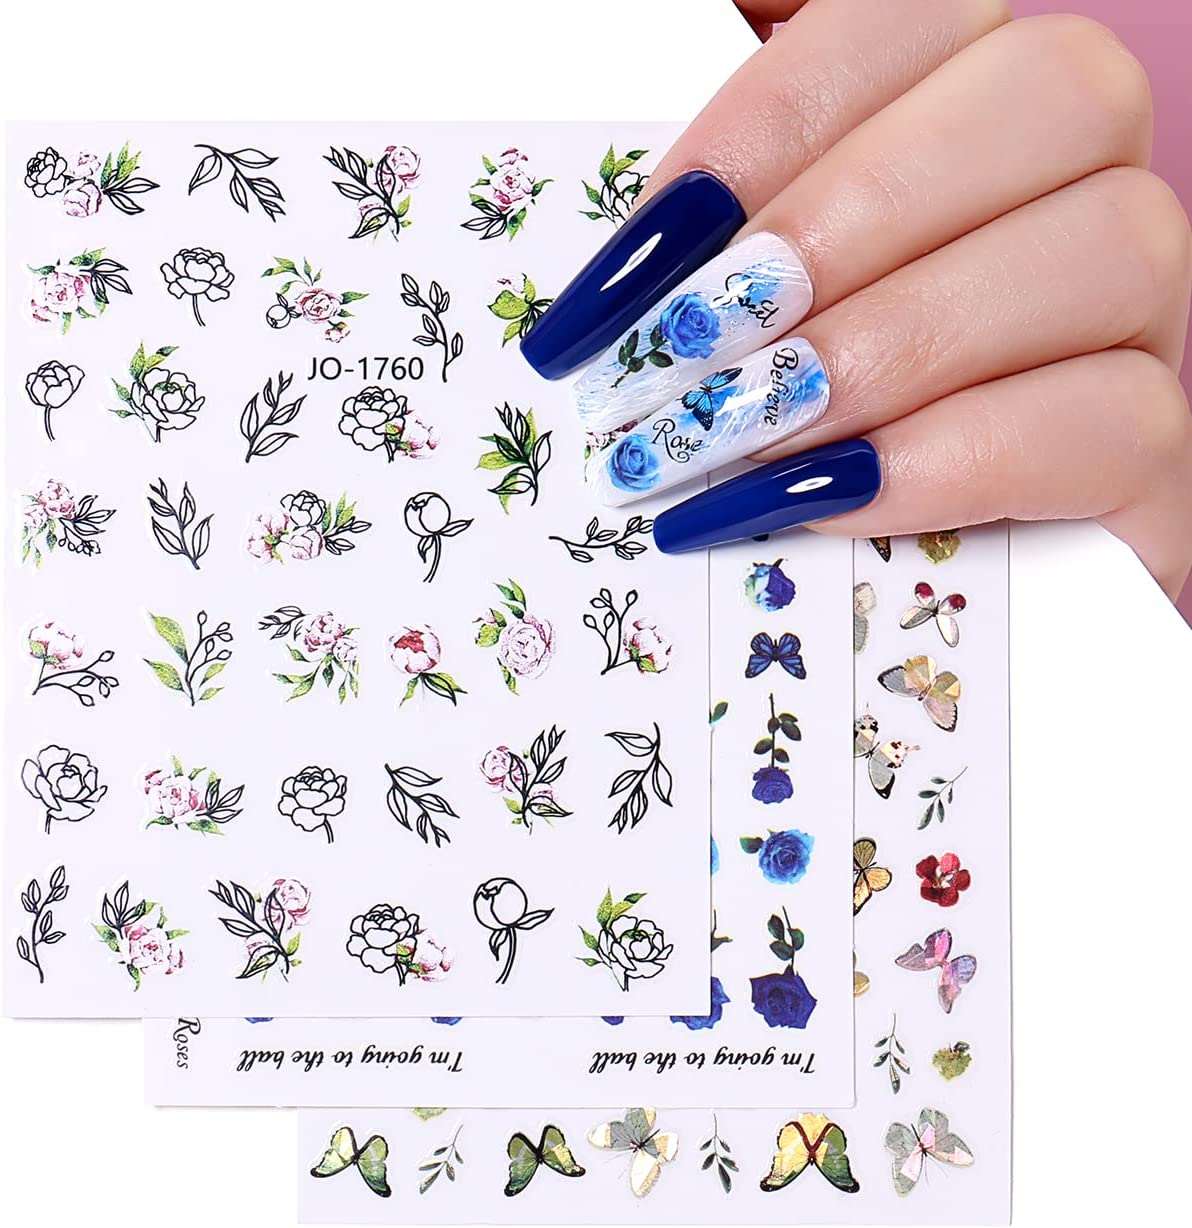 New 3D Roman Nail Art Stickers Decals Transfers Self-adhesive